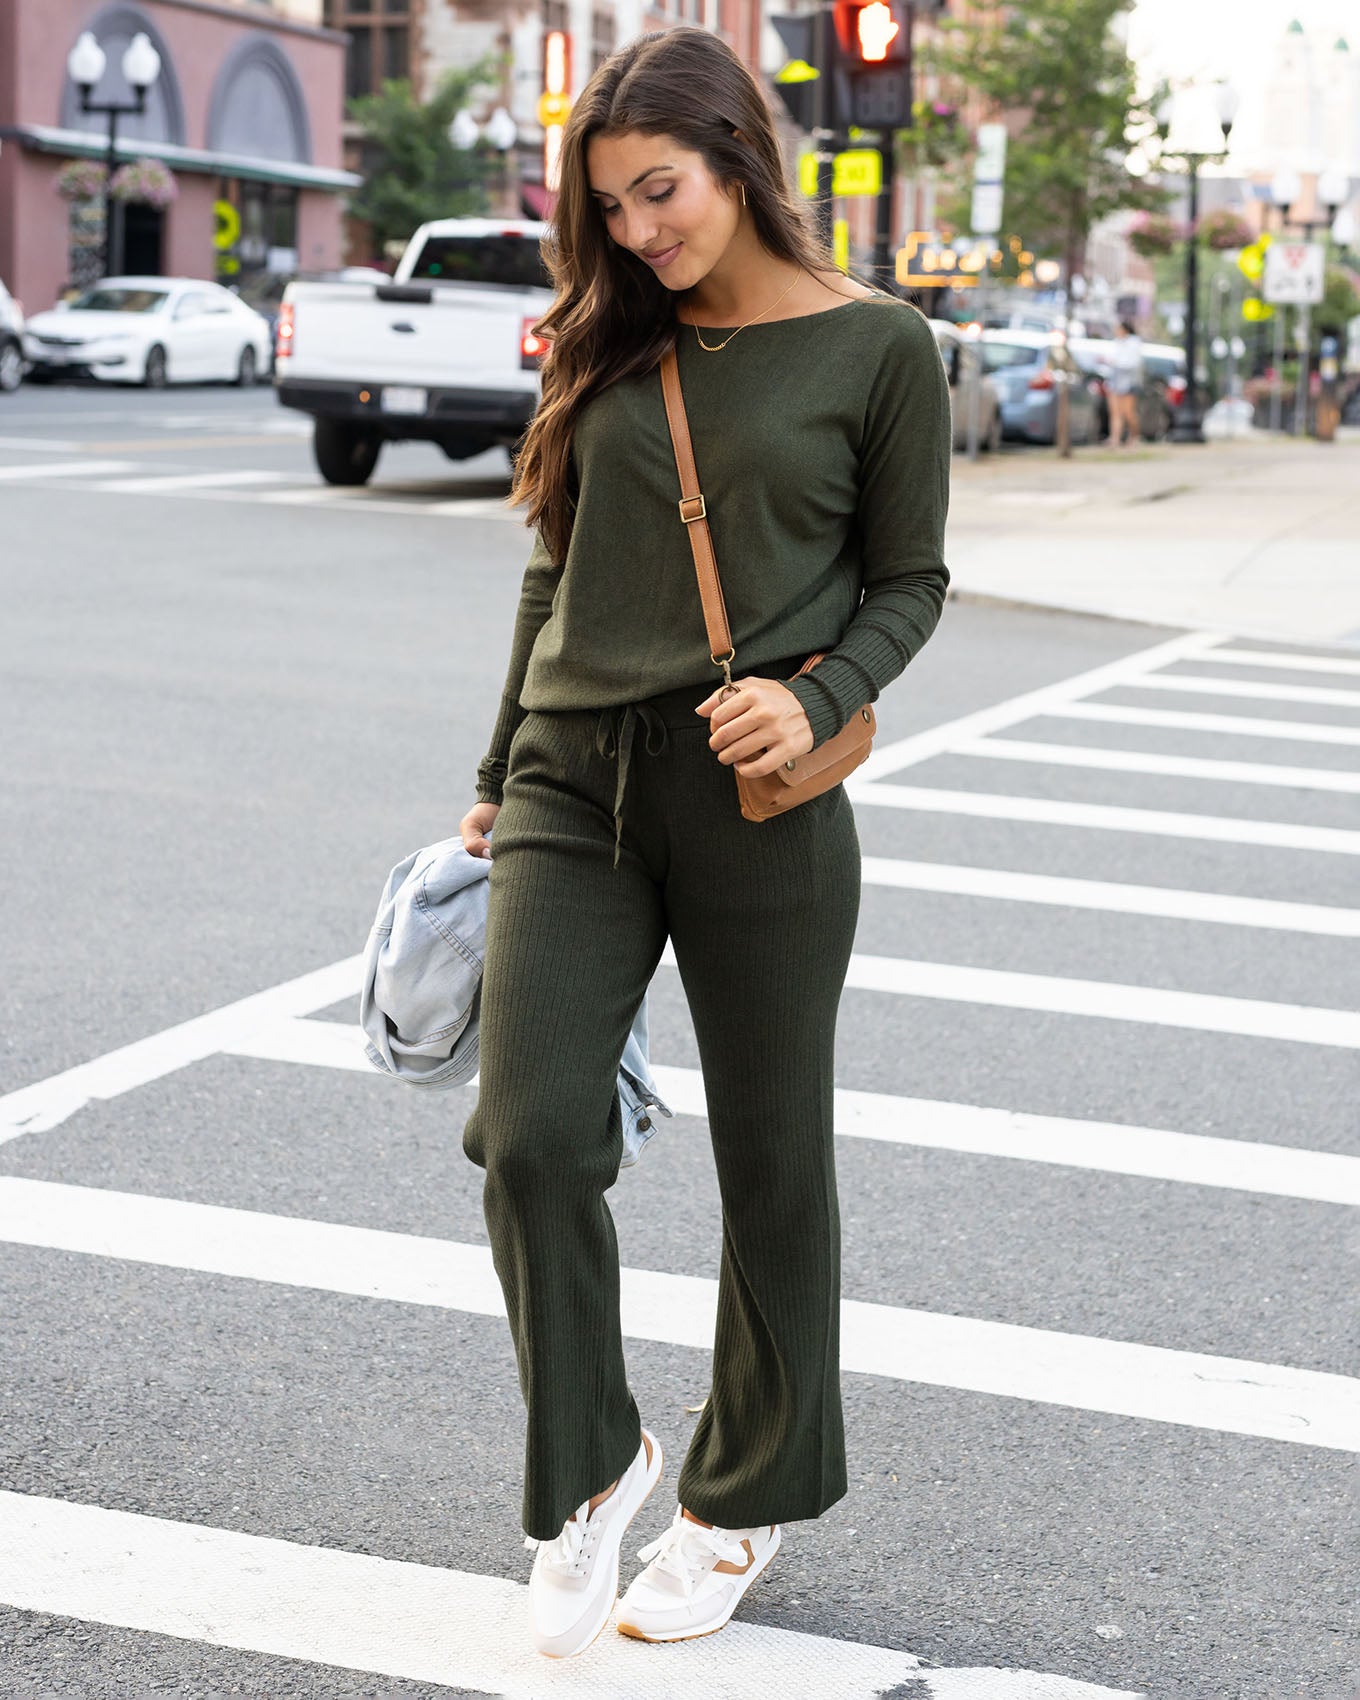 Pin by Ronda Gregory on outfits | Olive pants outfit, Spring outfits  casual, Olive green pants outfit